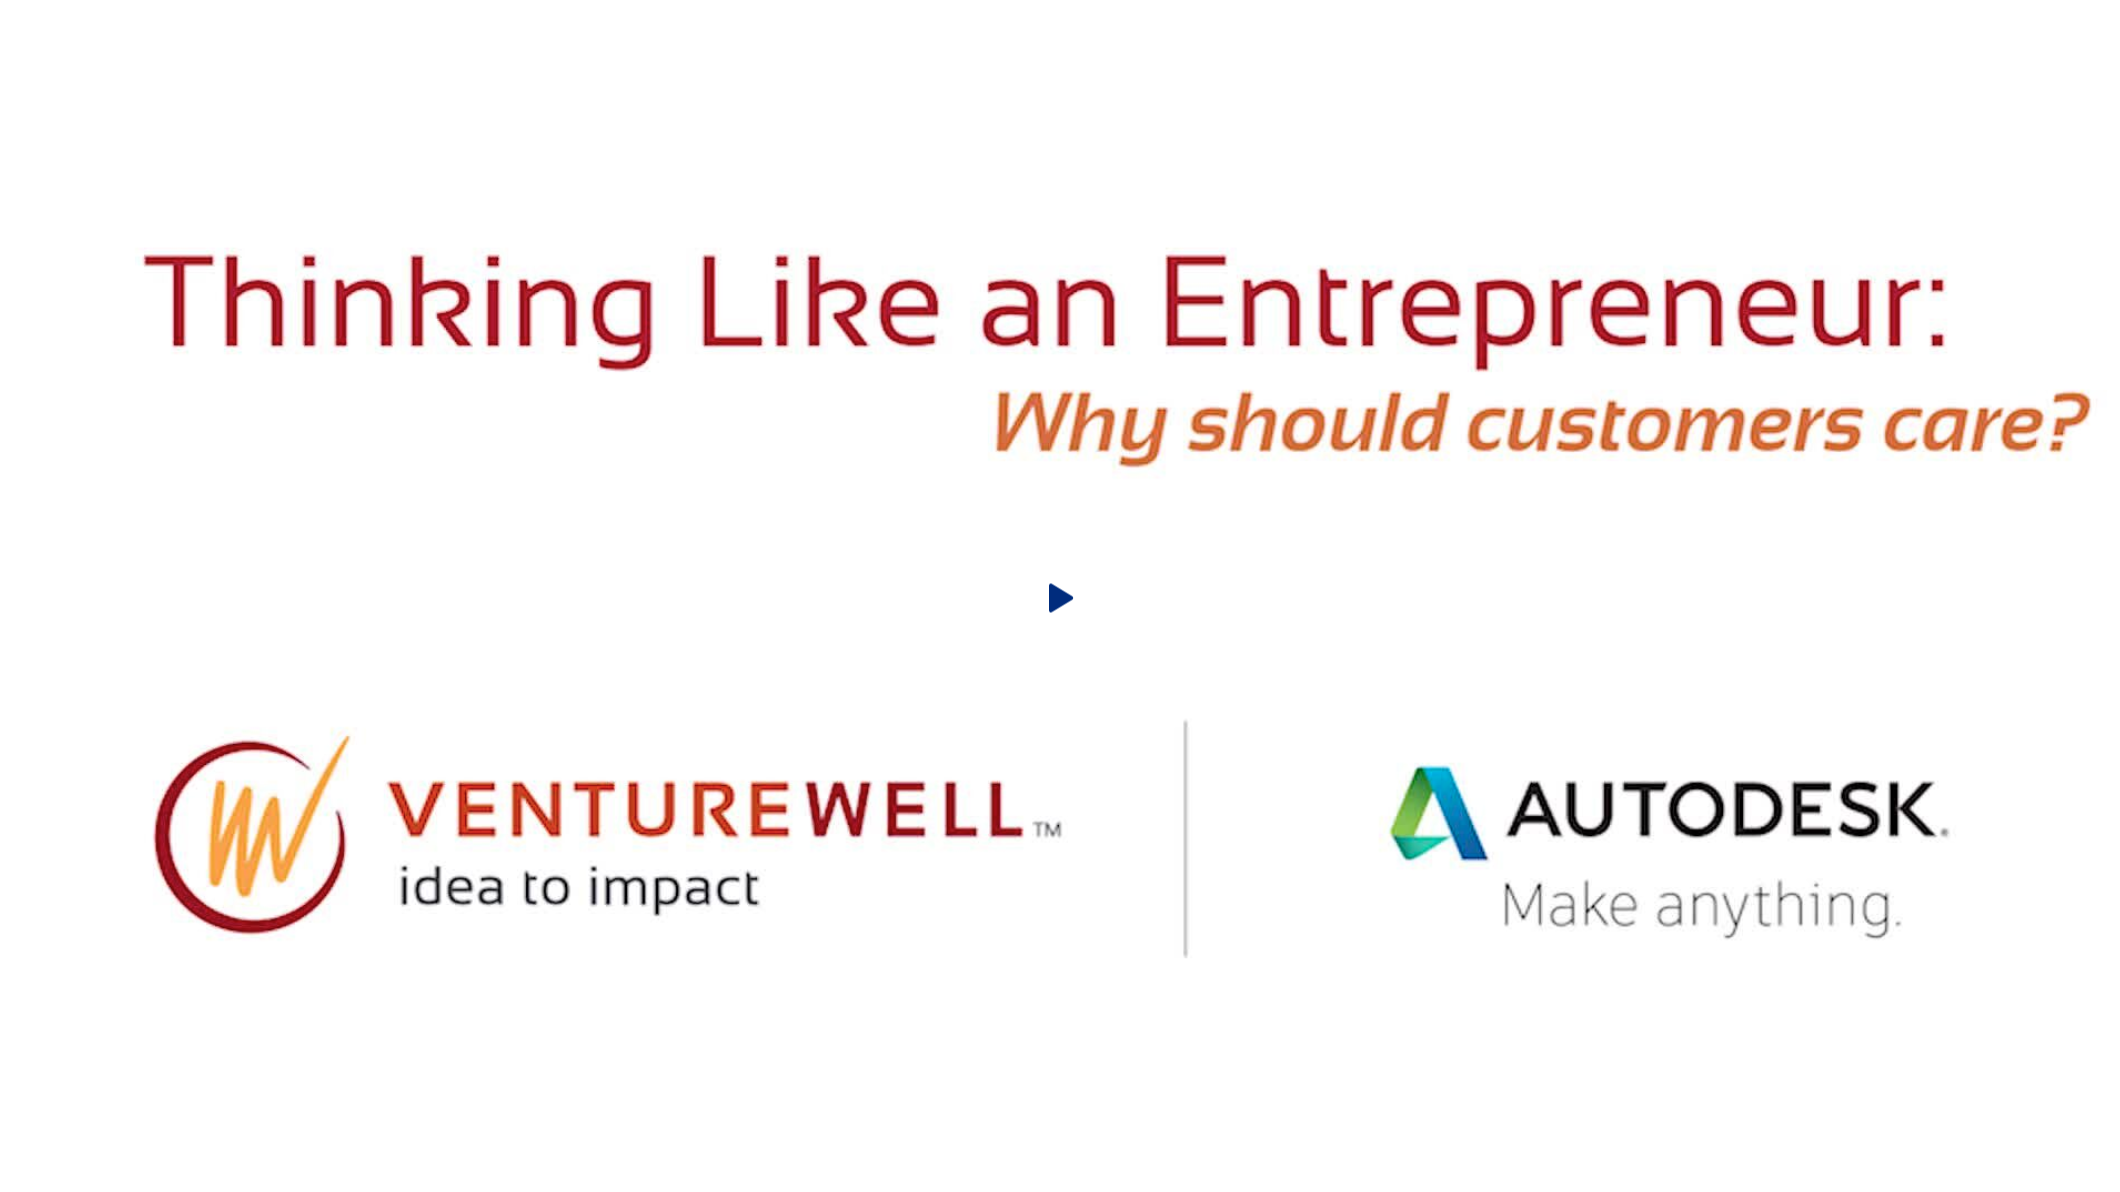 Thinking Like An Entrepreneur: Why should customers care?